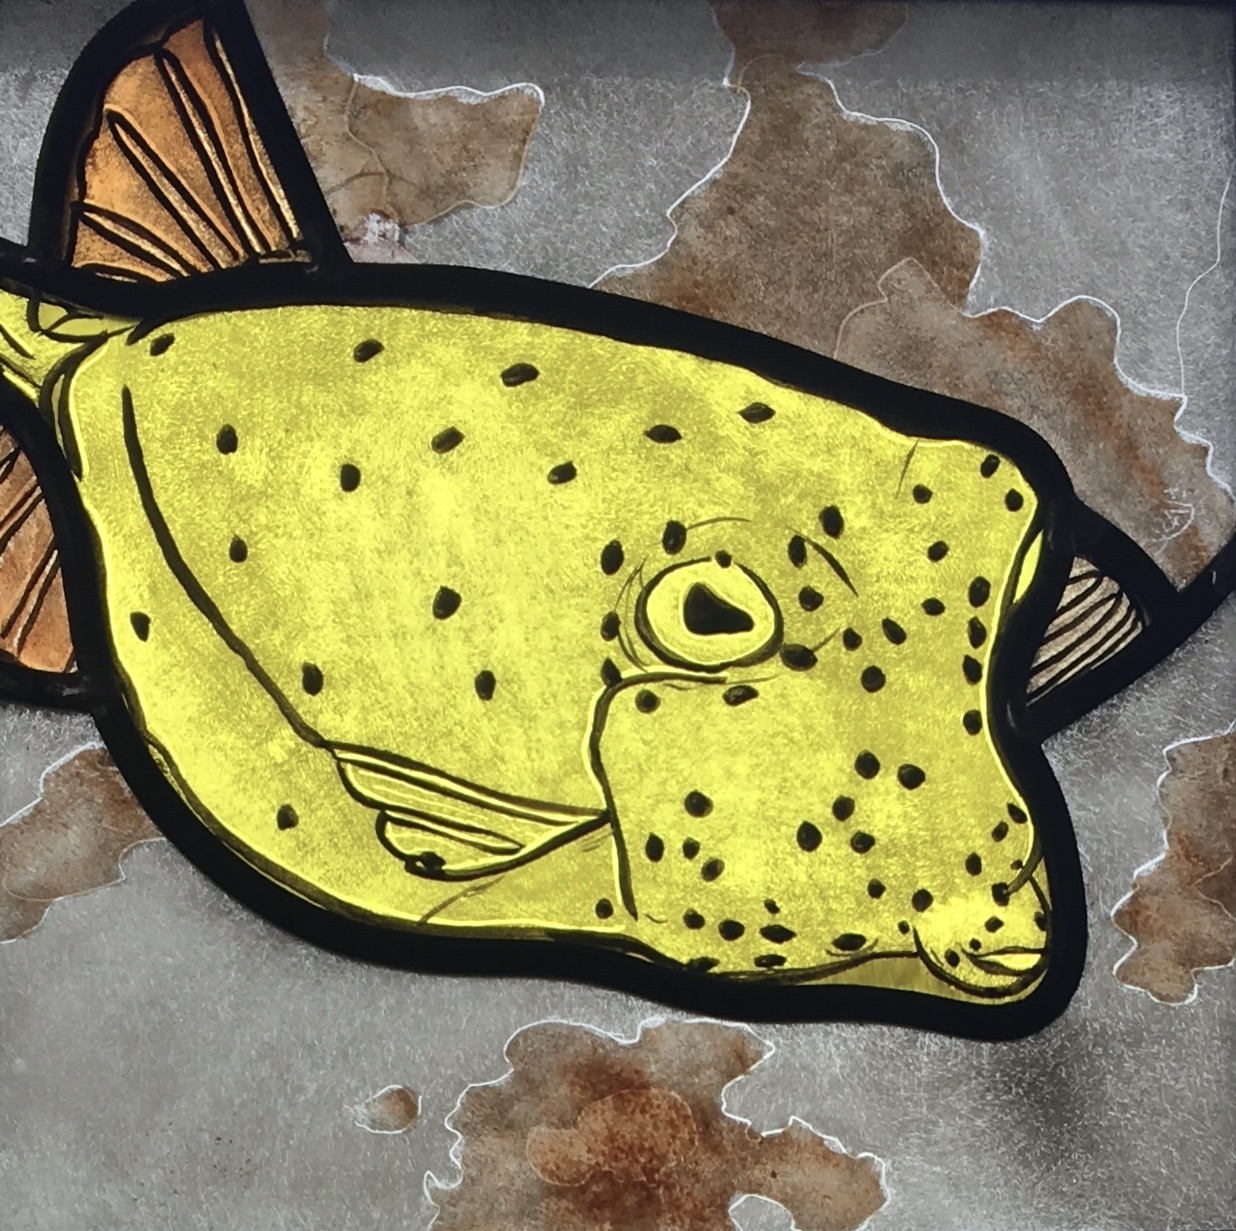 No, I do not have measles, it is just my special skin and though I look quite sad without, I am really smiling within Yellow Boxfish – Red Sea